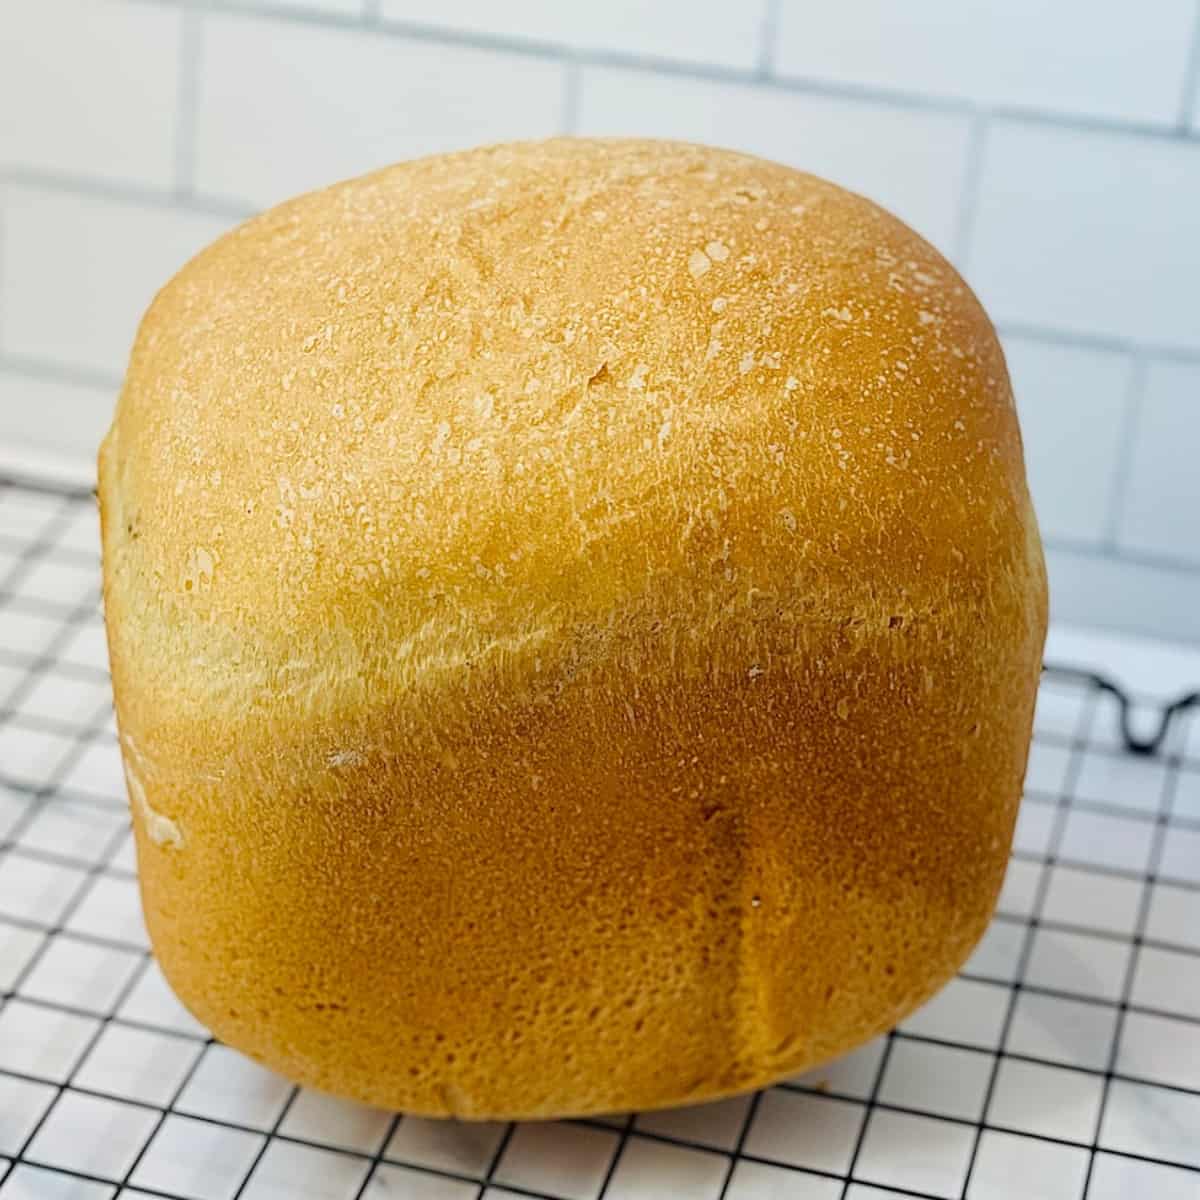 Homemade Bread with my Black and Decker All In One Breadmaker 